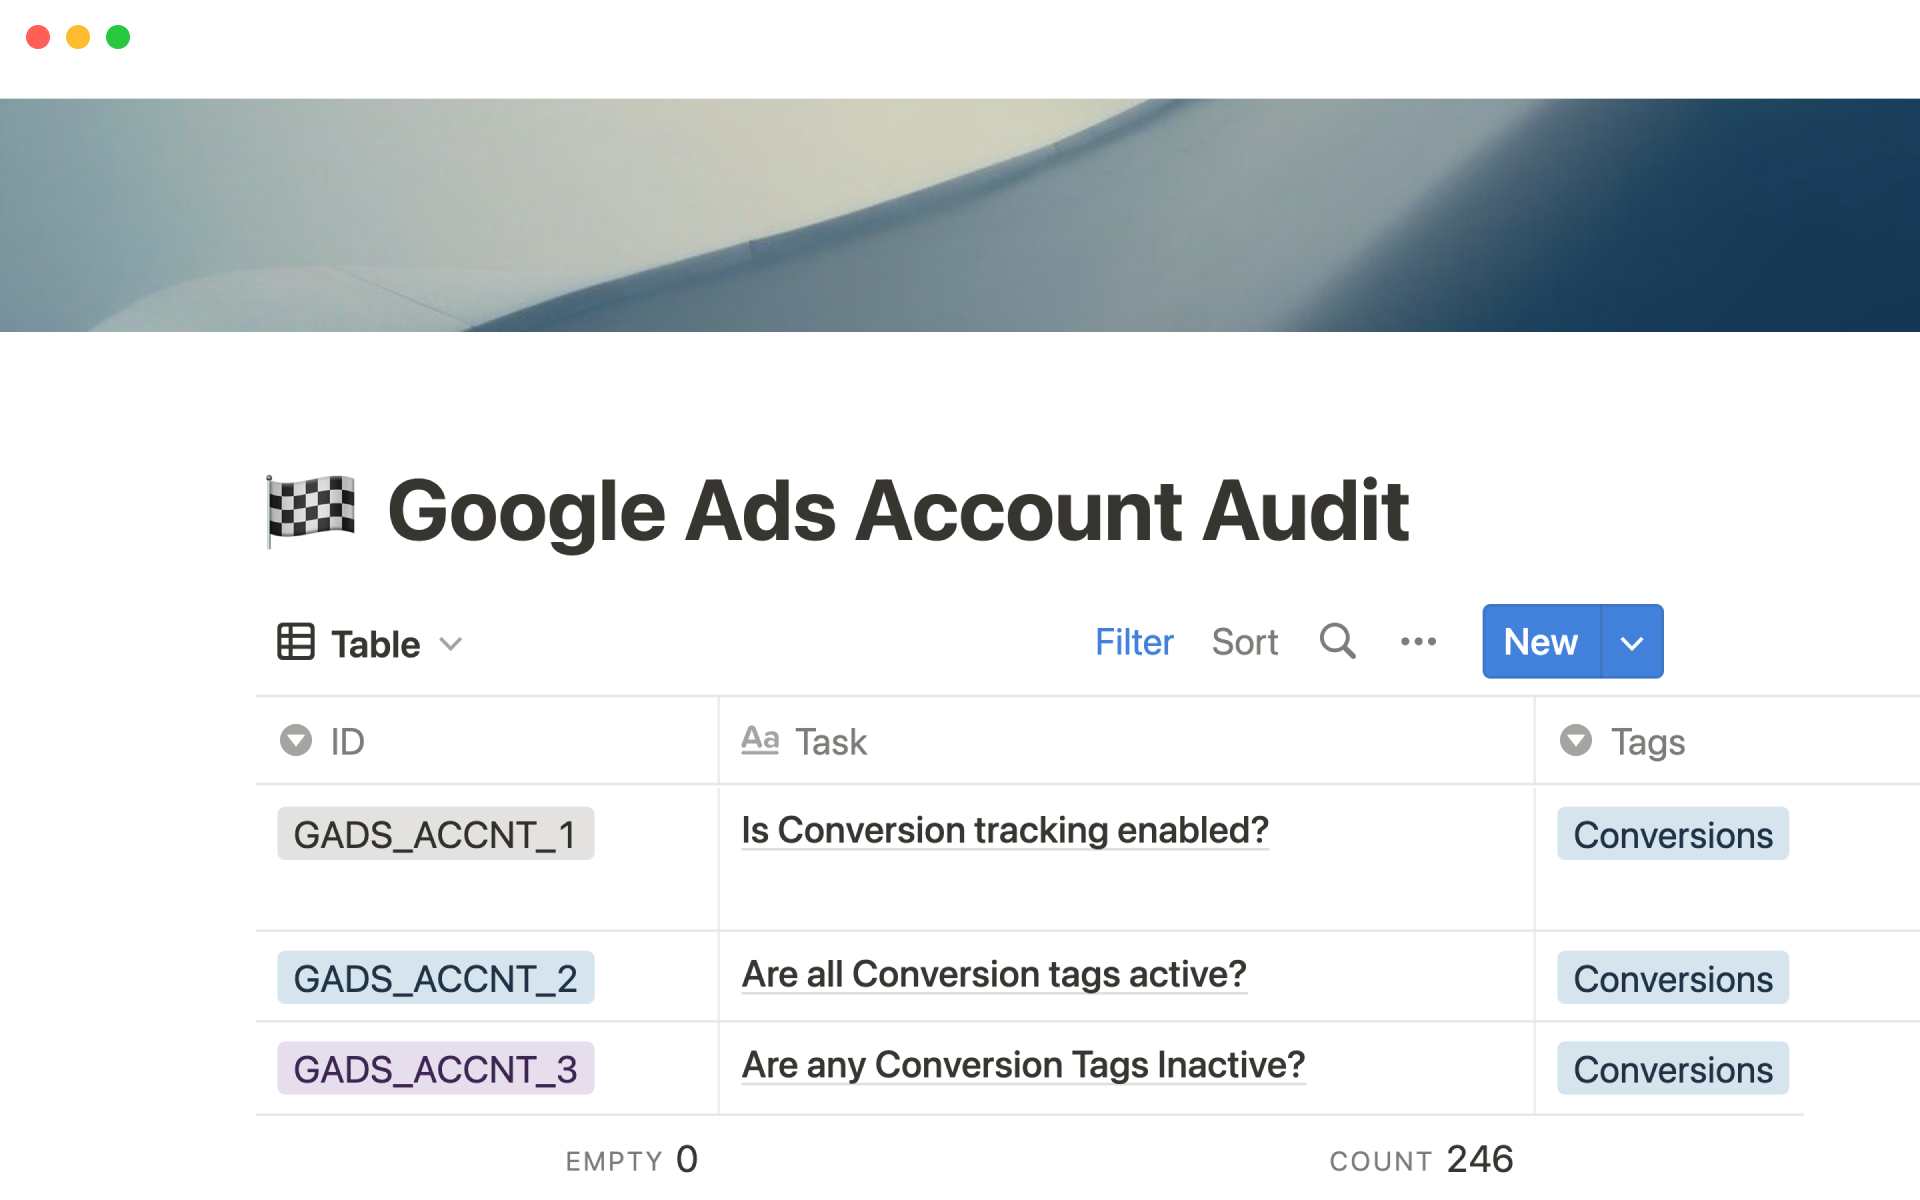 Helps marketers and business owners audit their Google Ads account.